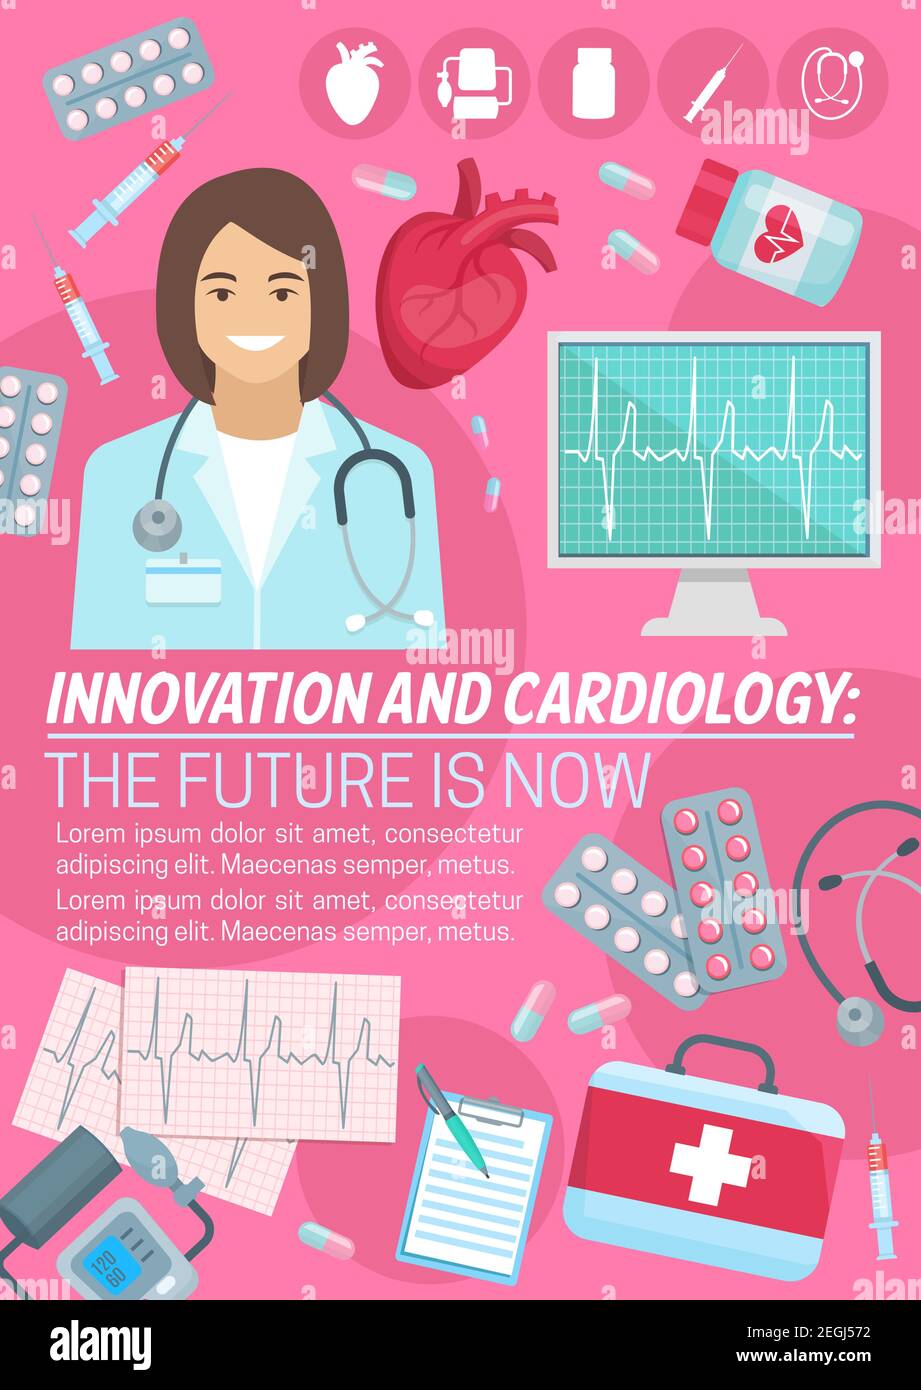 Cardiology and innovation cardio medicine poster for heart health clinic and medical surgery. Vector design of cardiologist doctor, first aid kit and Stock Vector